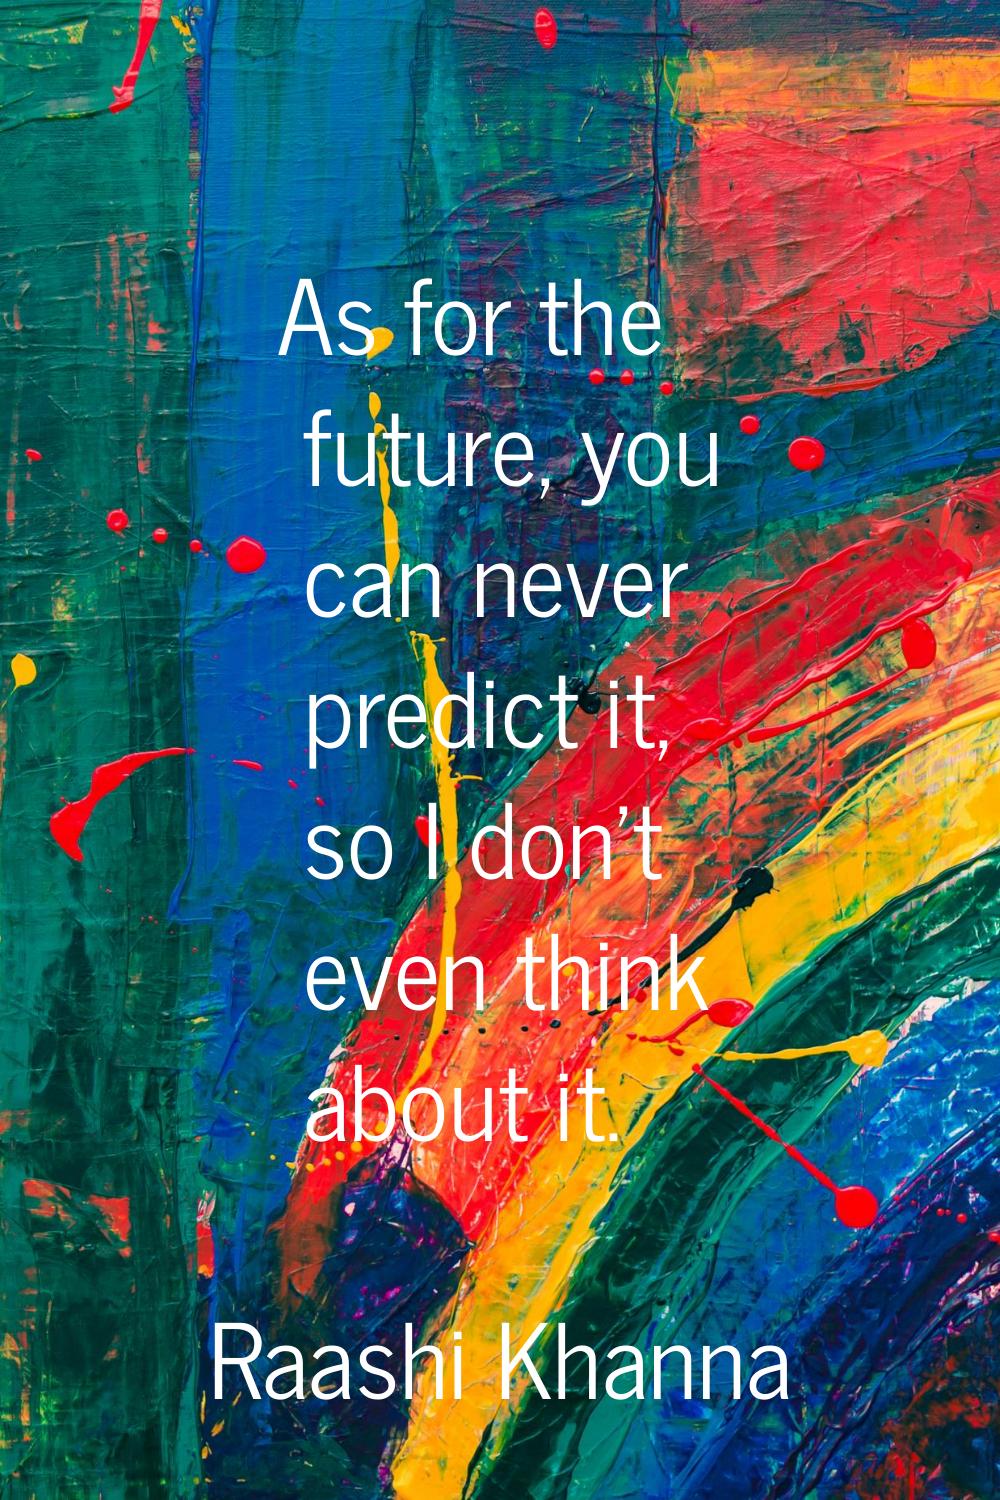 As for the future, you can never predict it, so I don't even think about it.